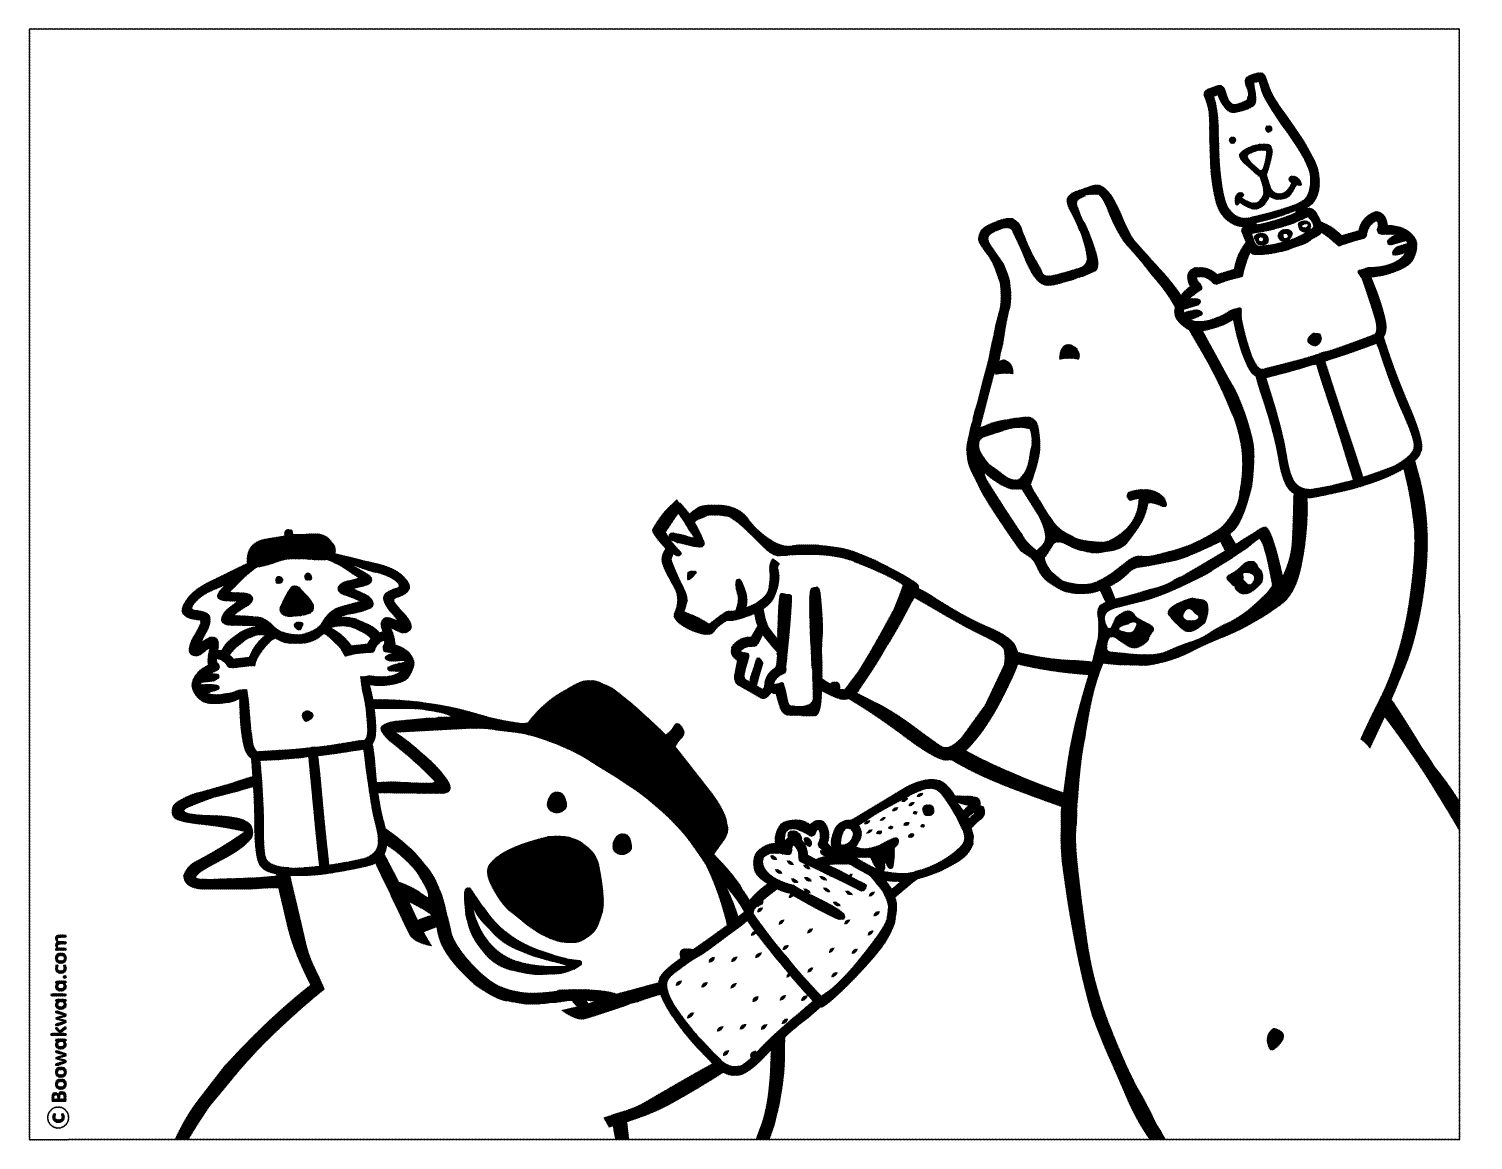 Glove Puppet Coloring Page